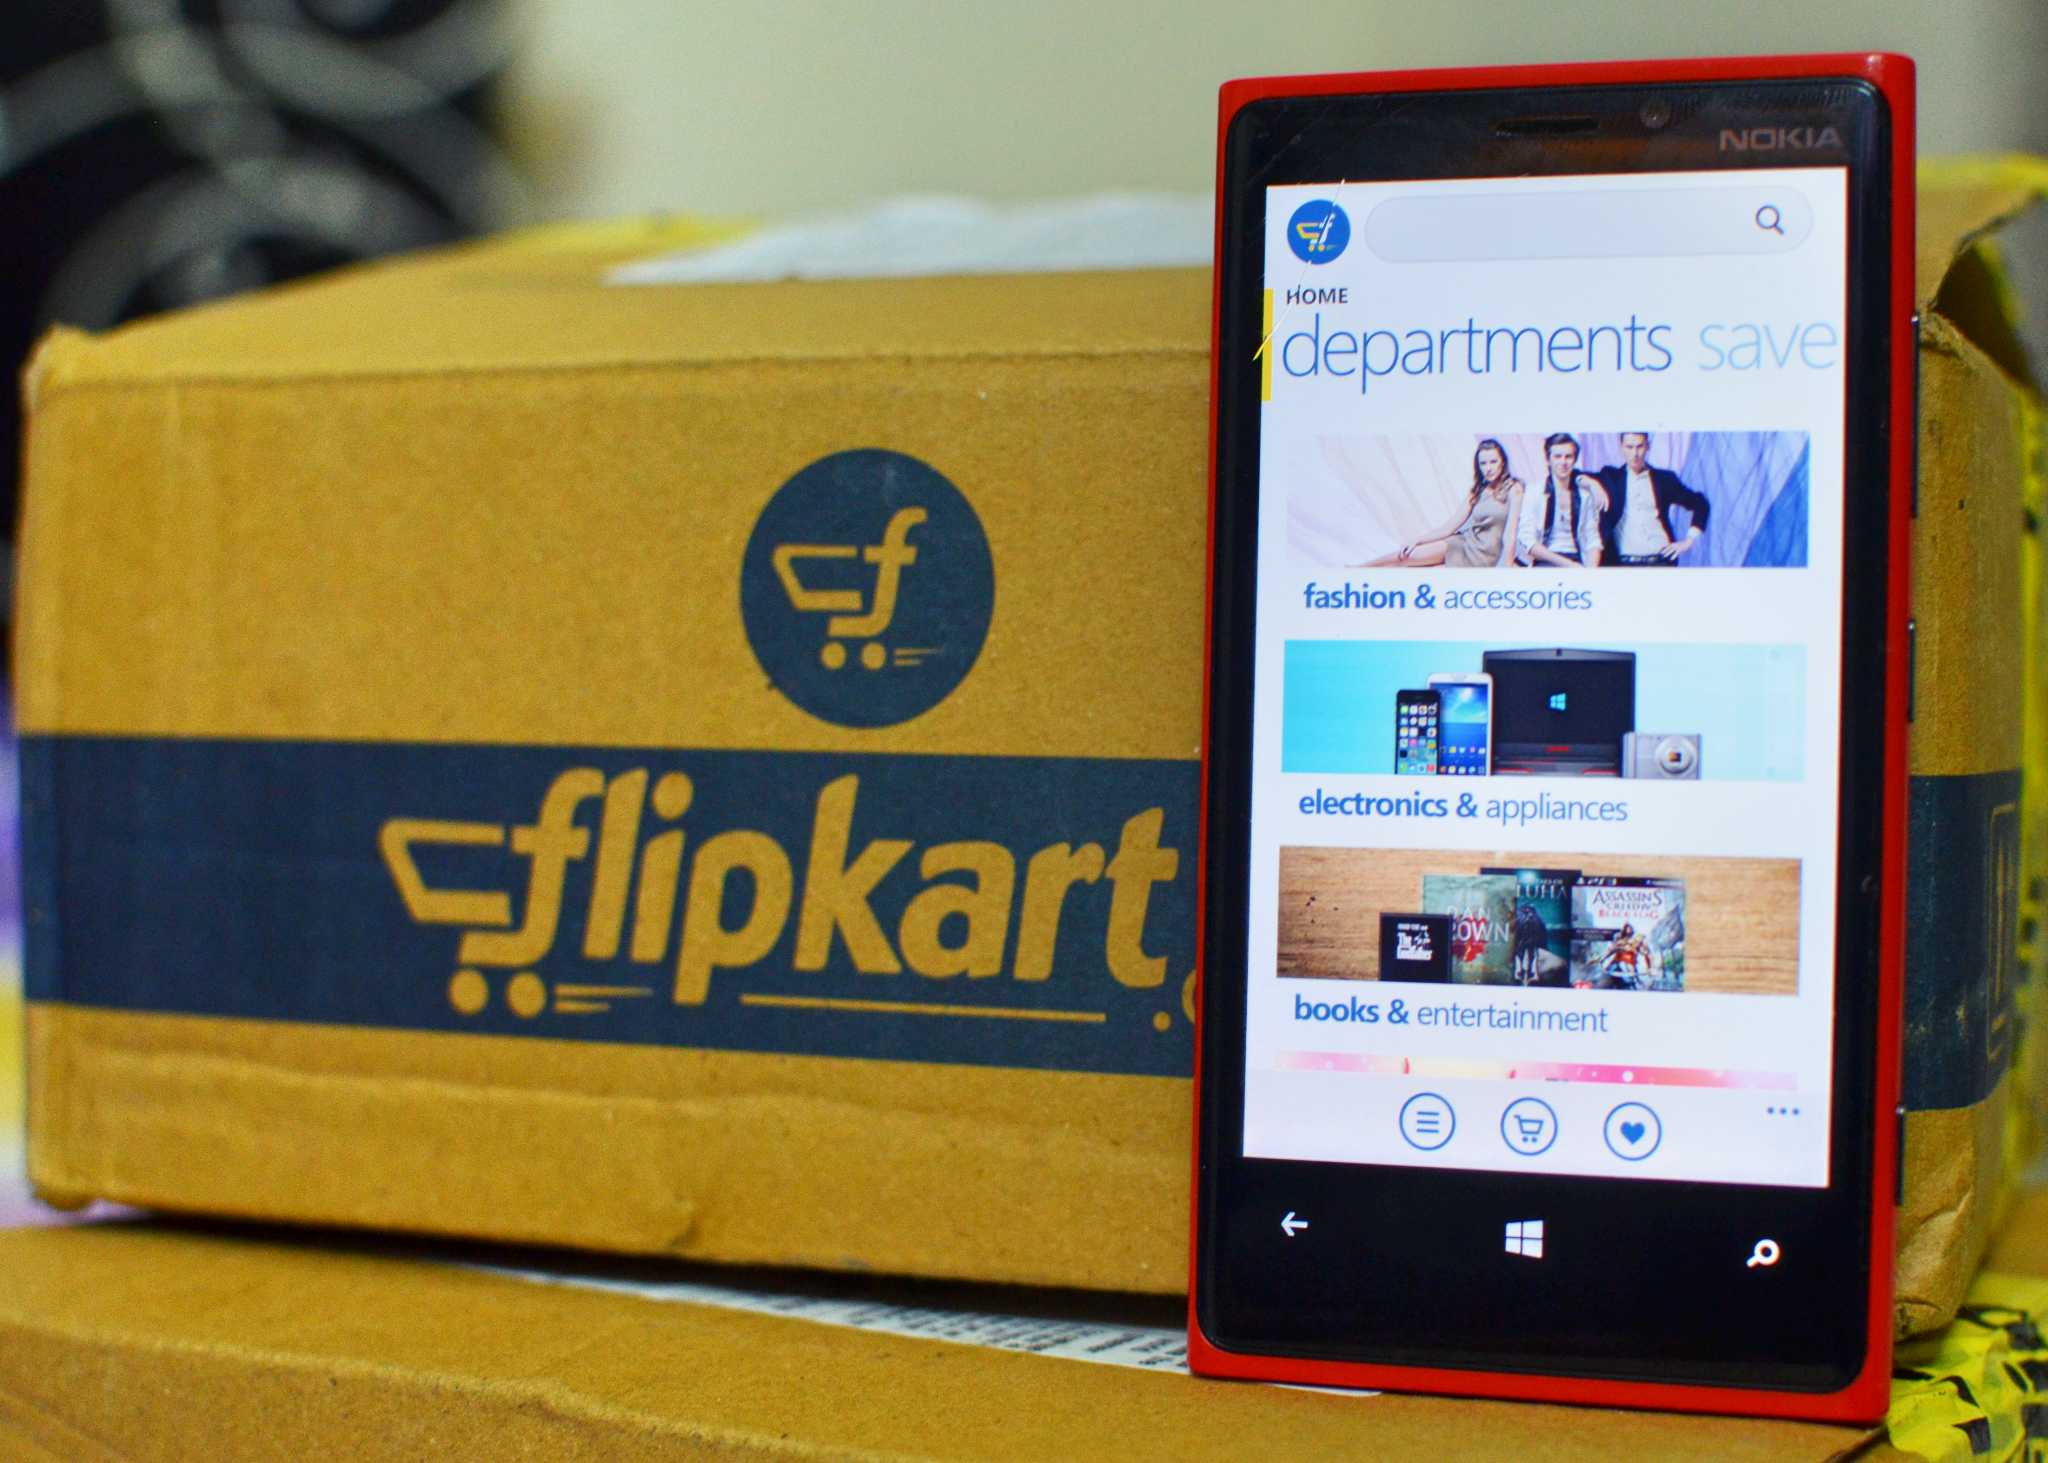 You can now ask Flipkart what you're looking for with new update